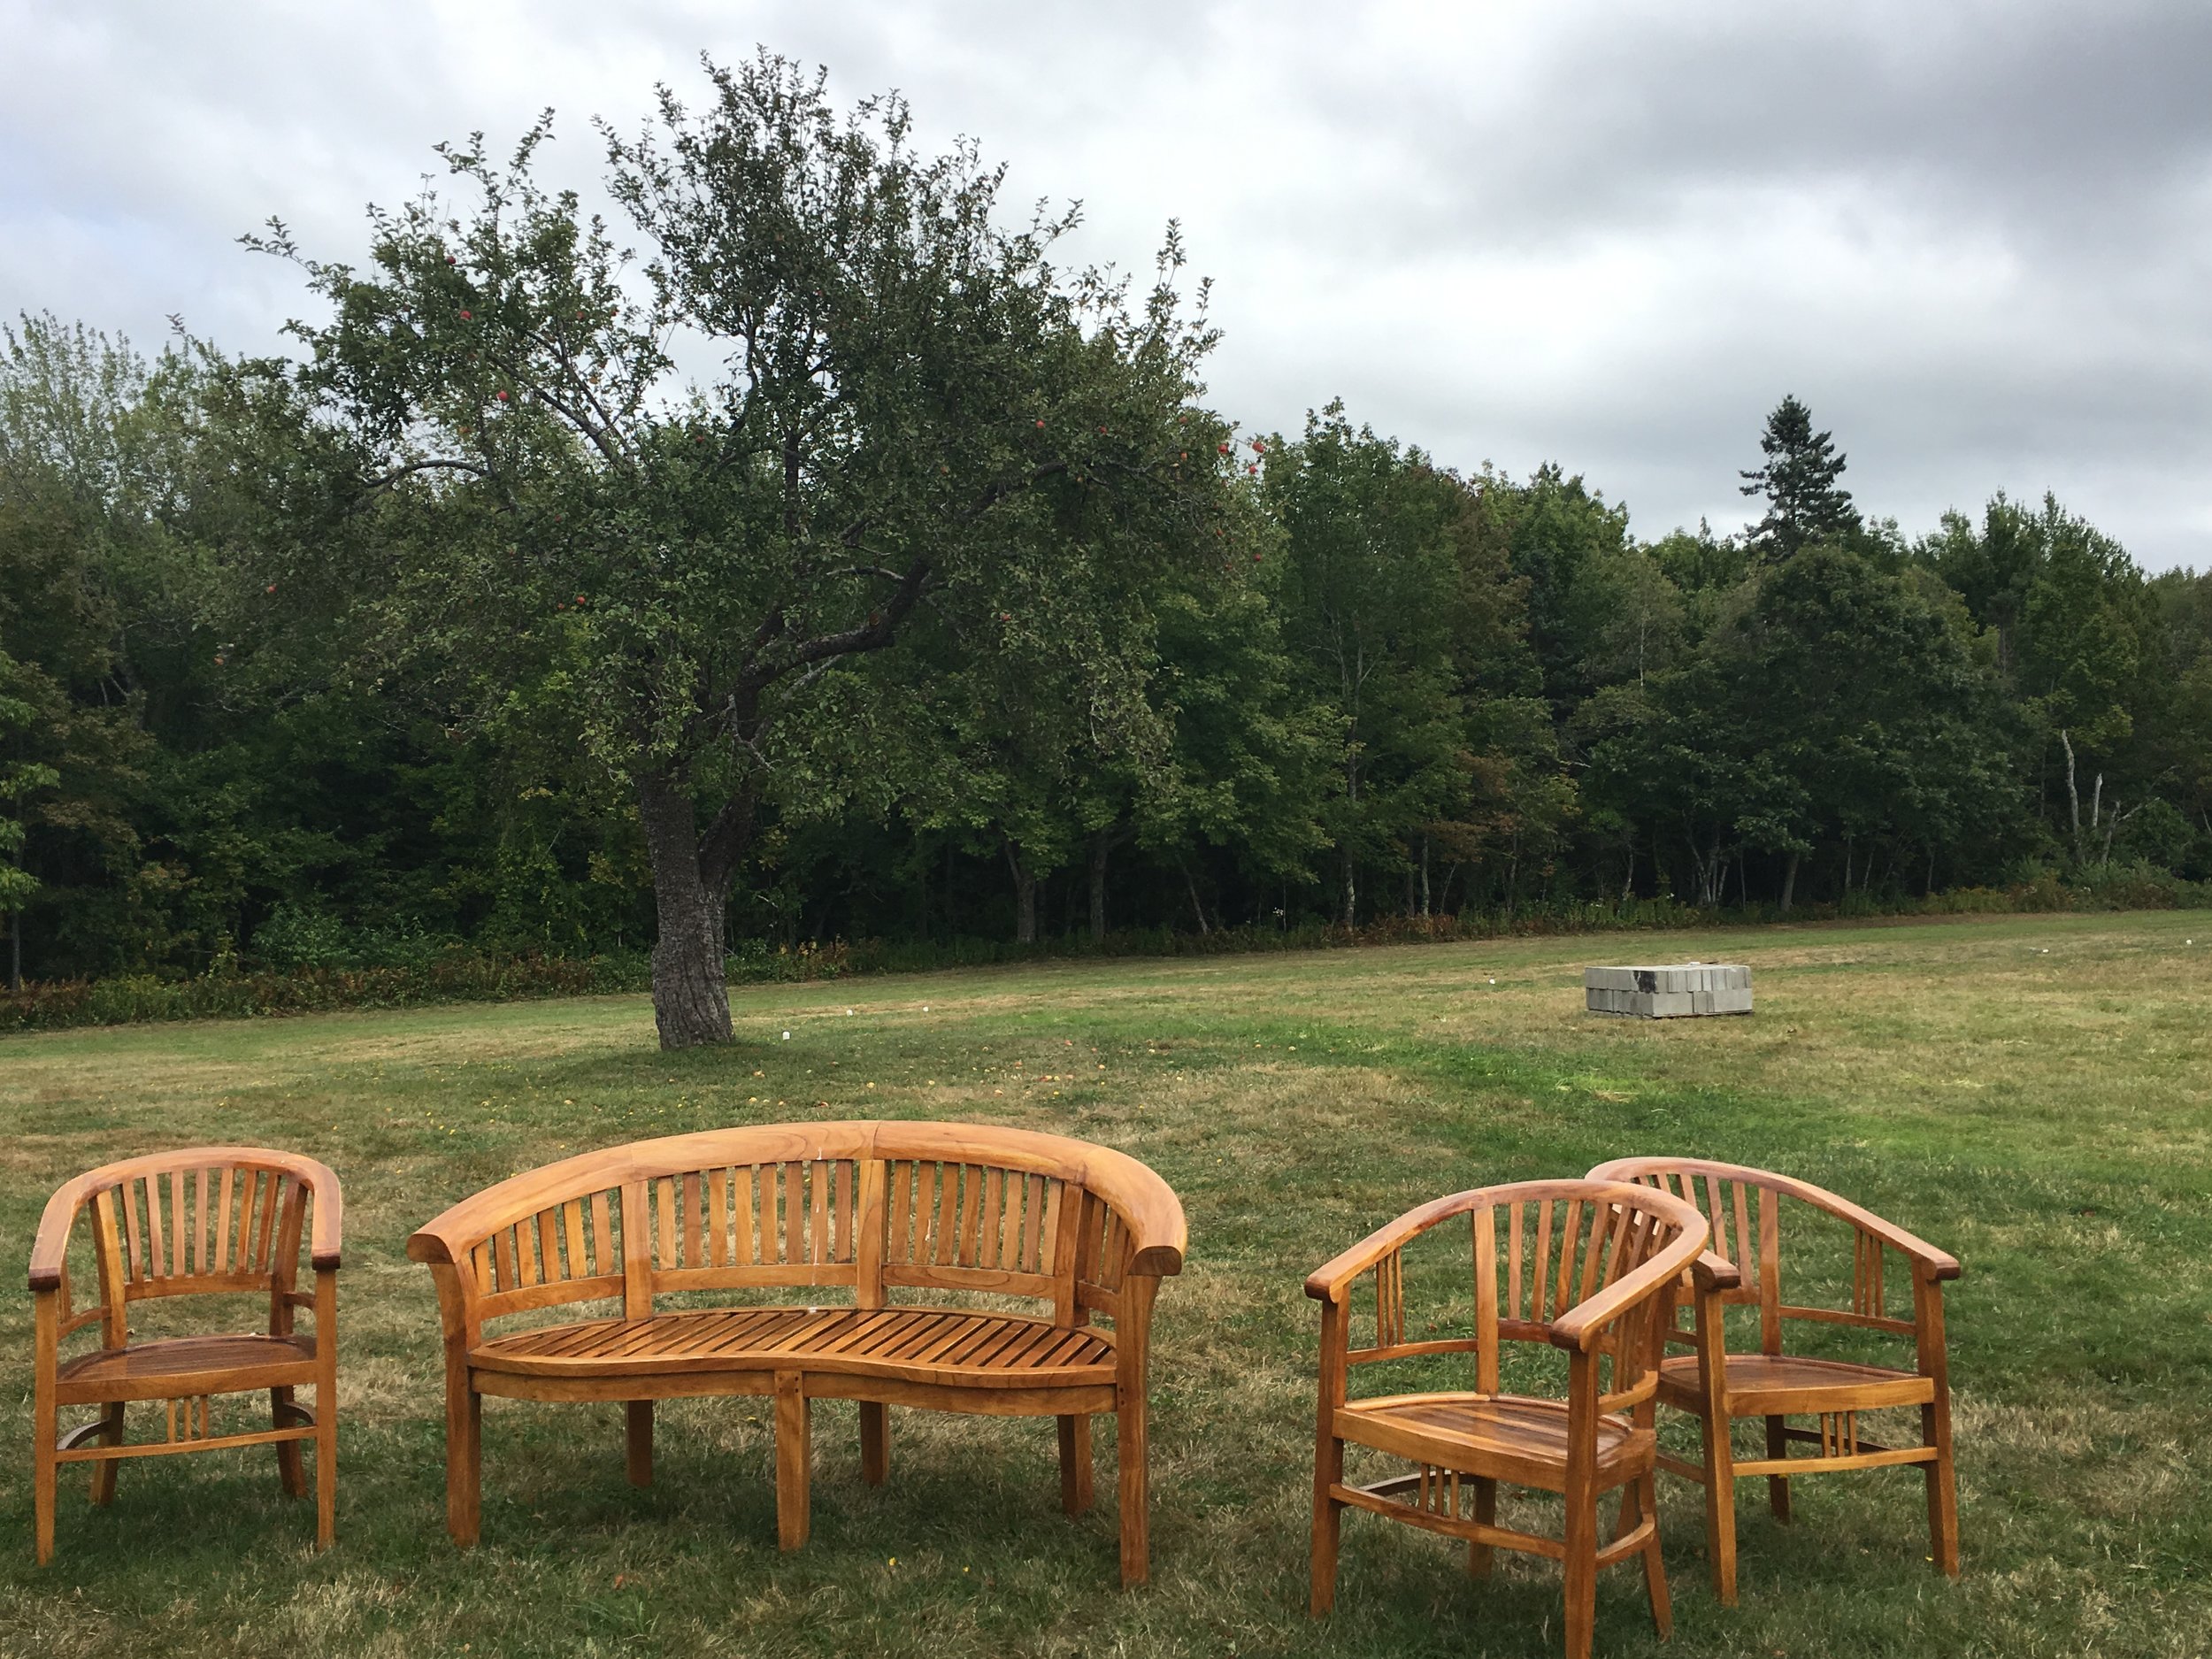 benches and apple trees